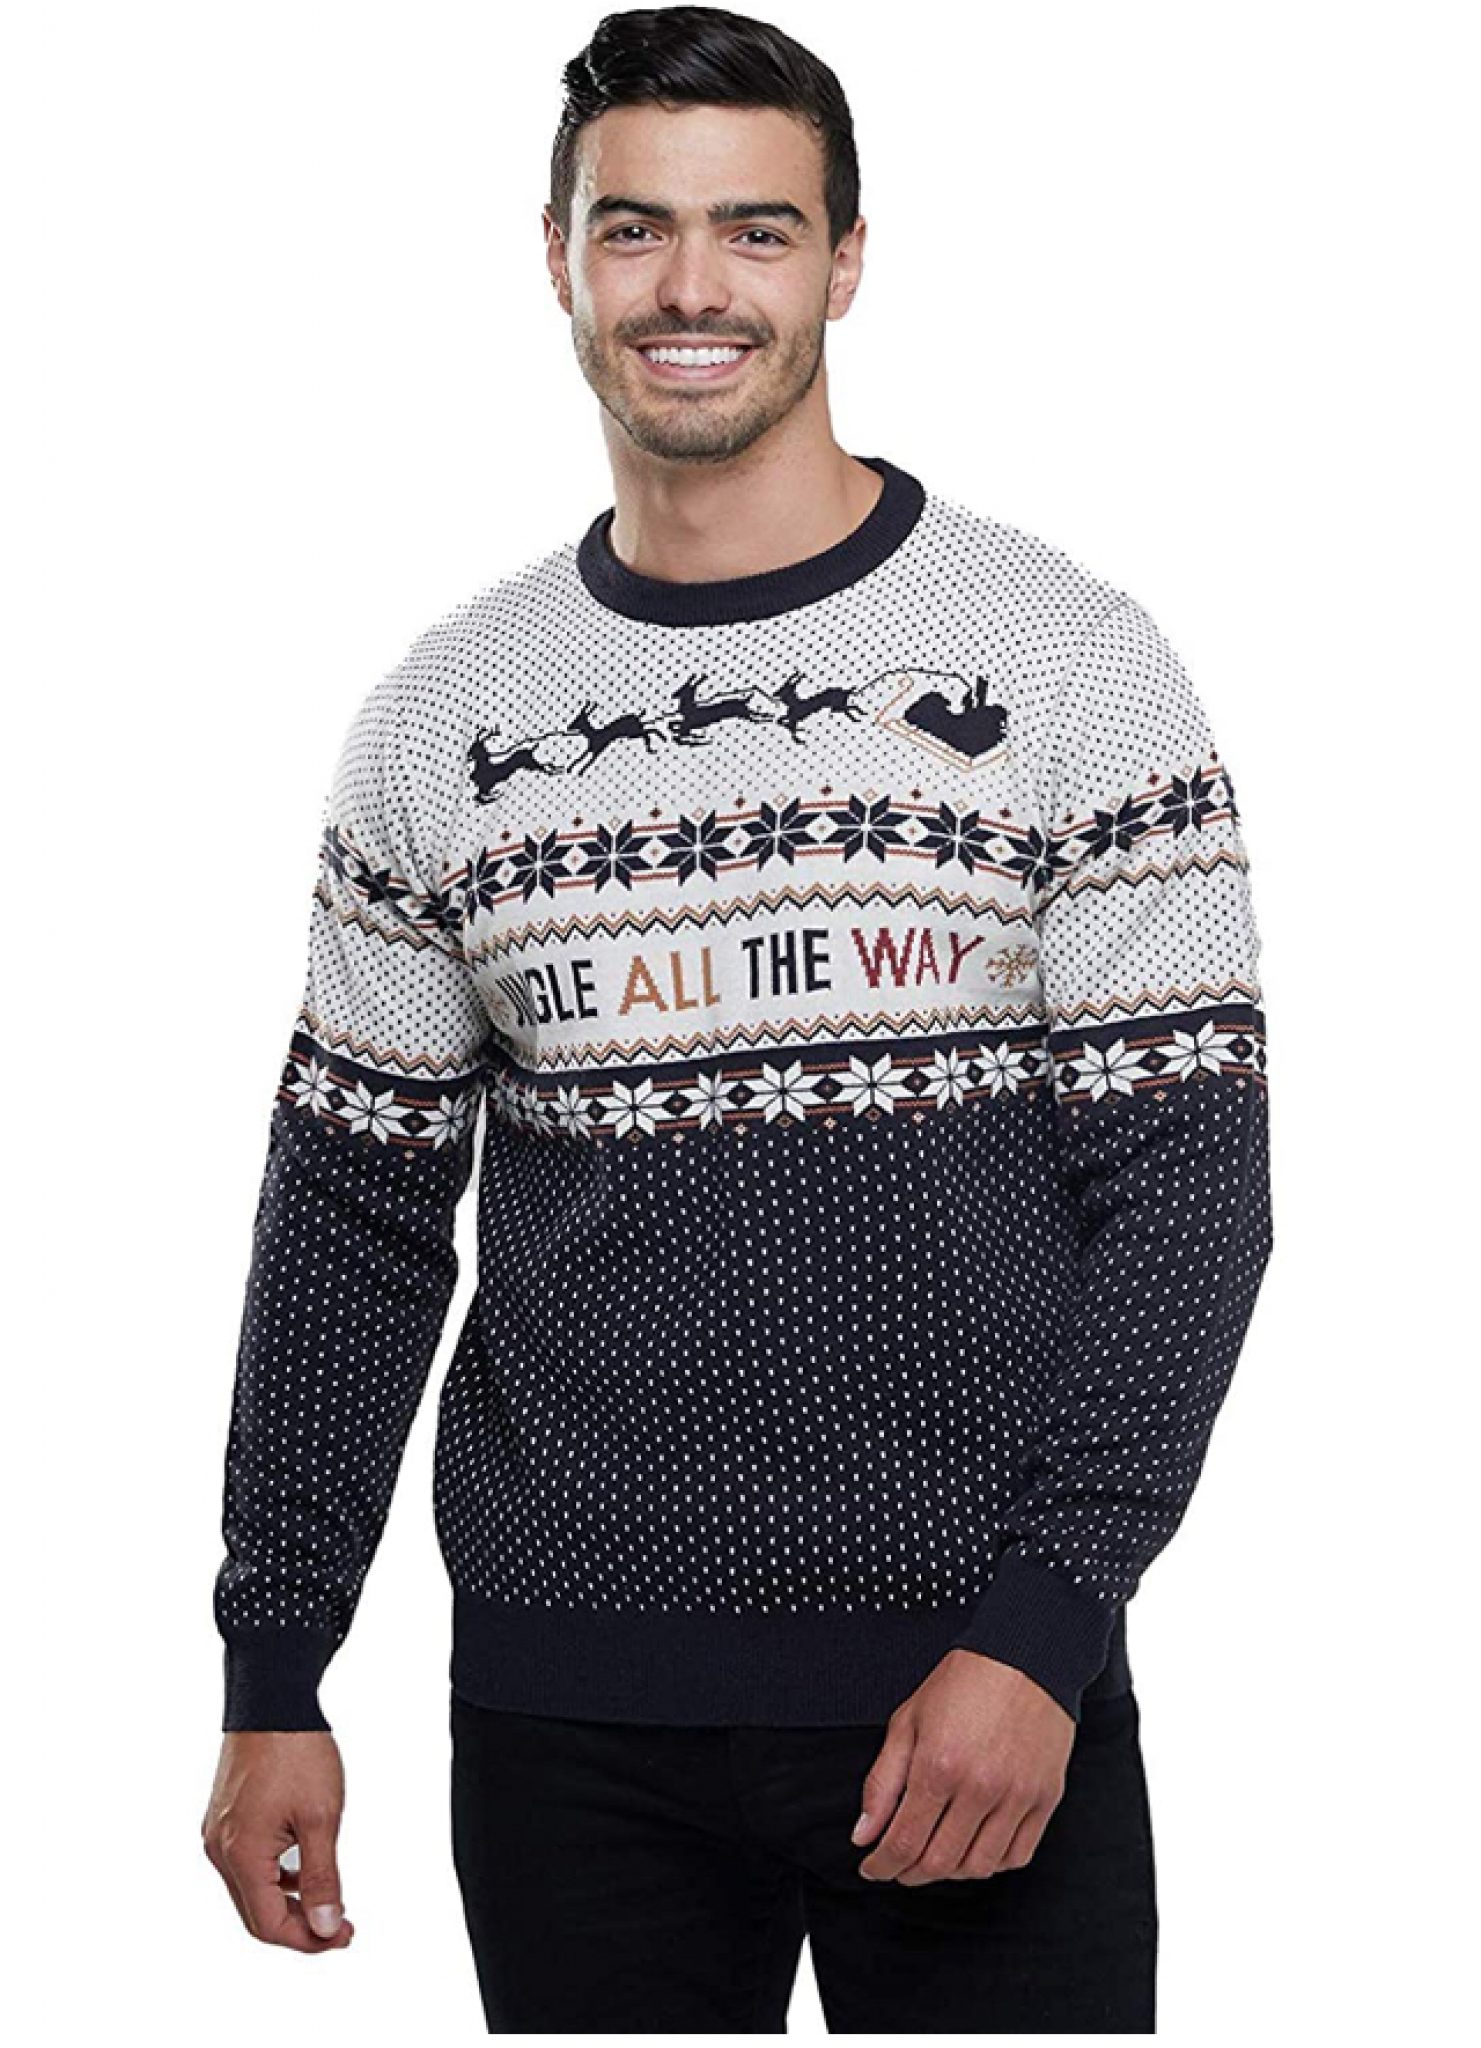 The best Christmas jumpers Should you get matching, family, or his